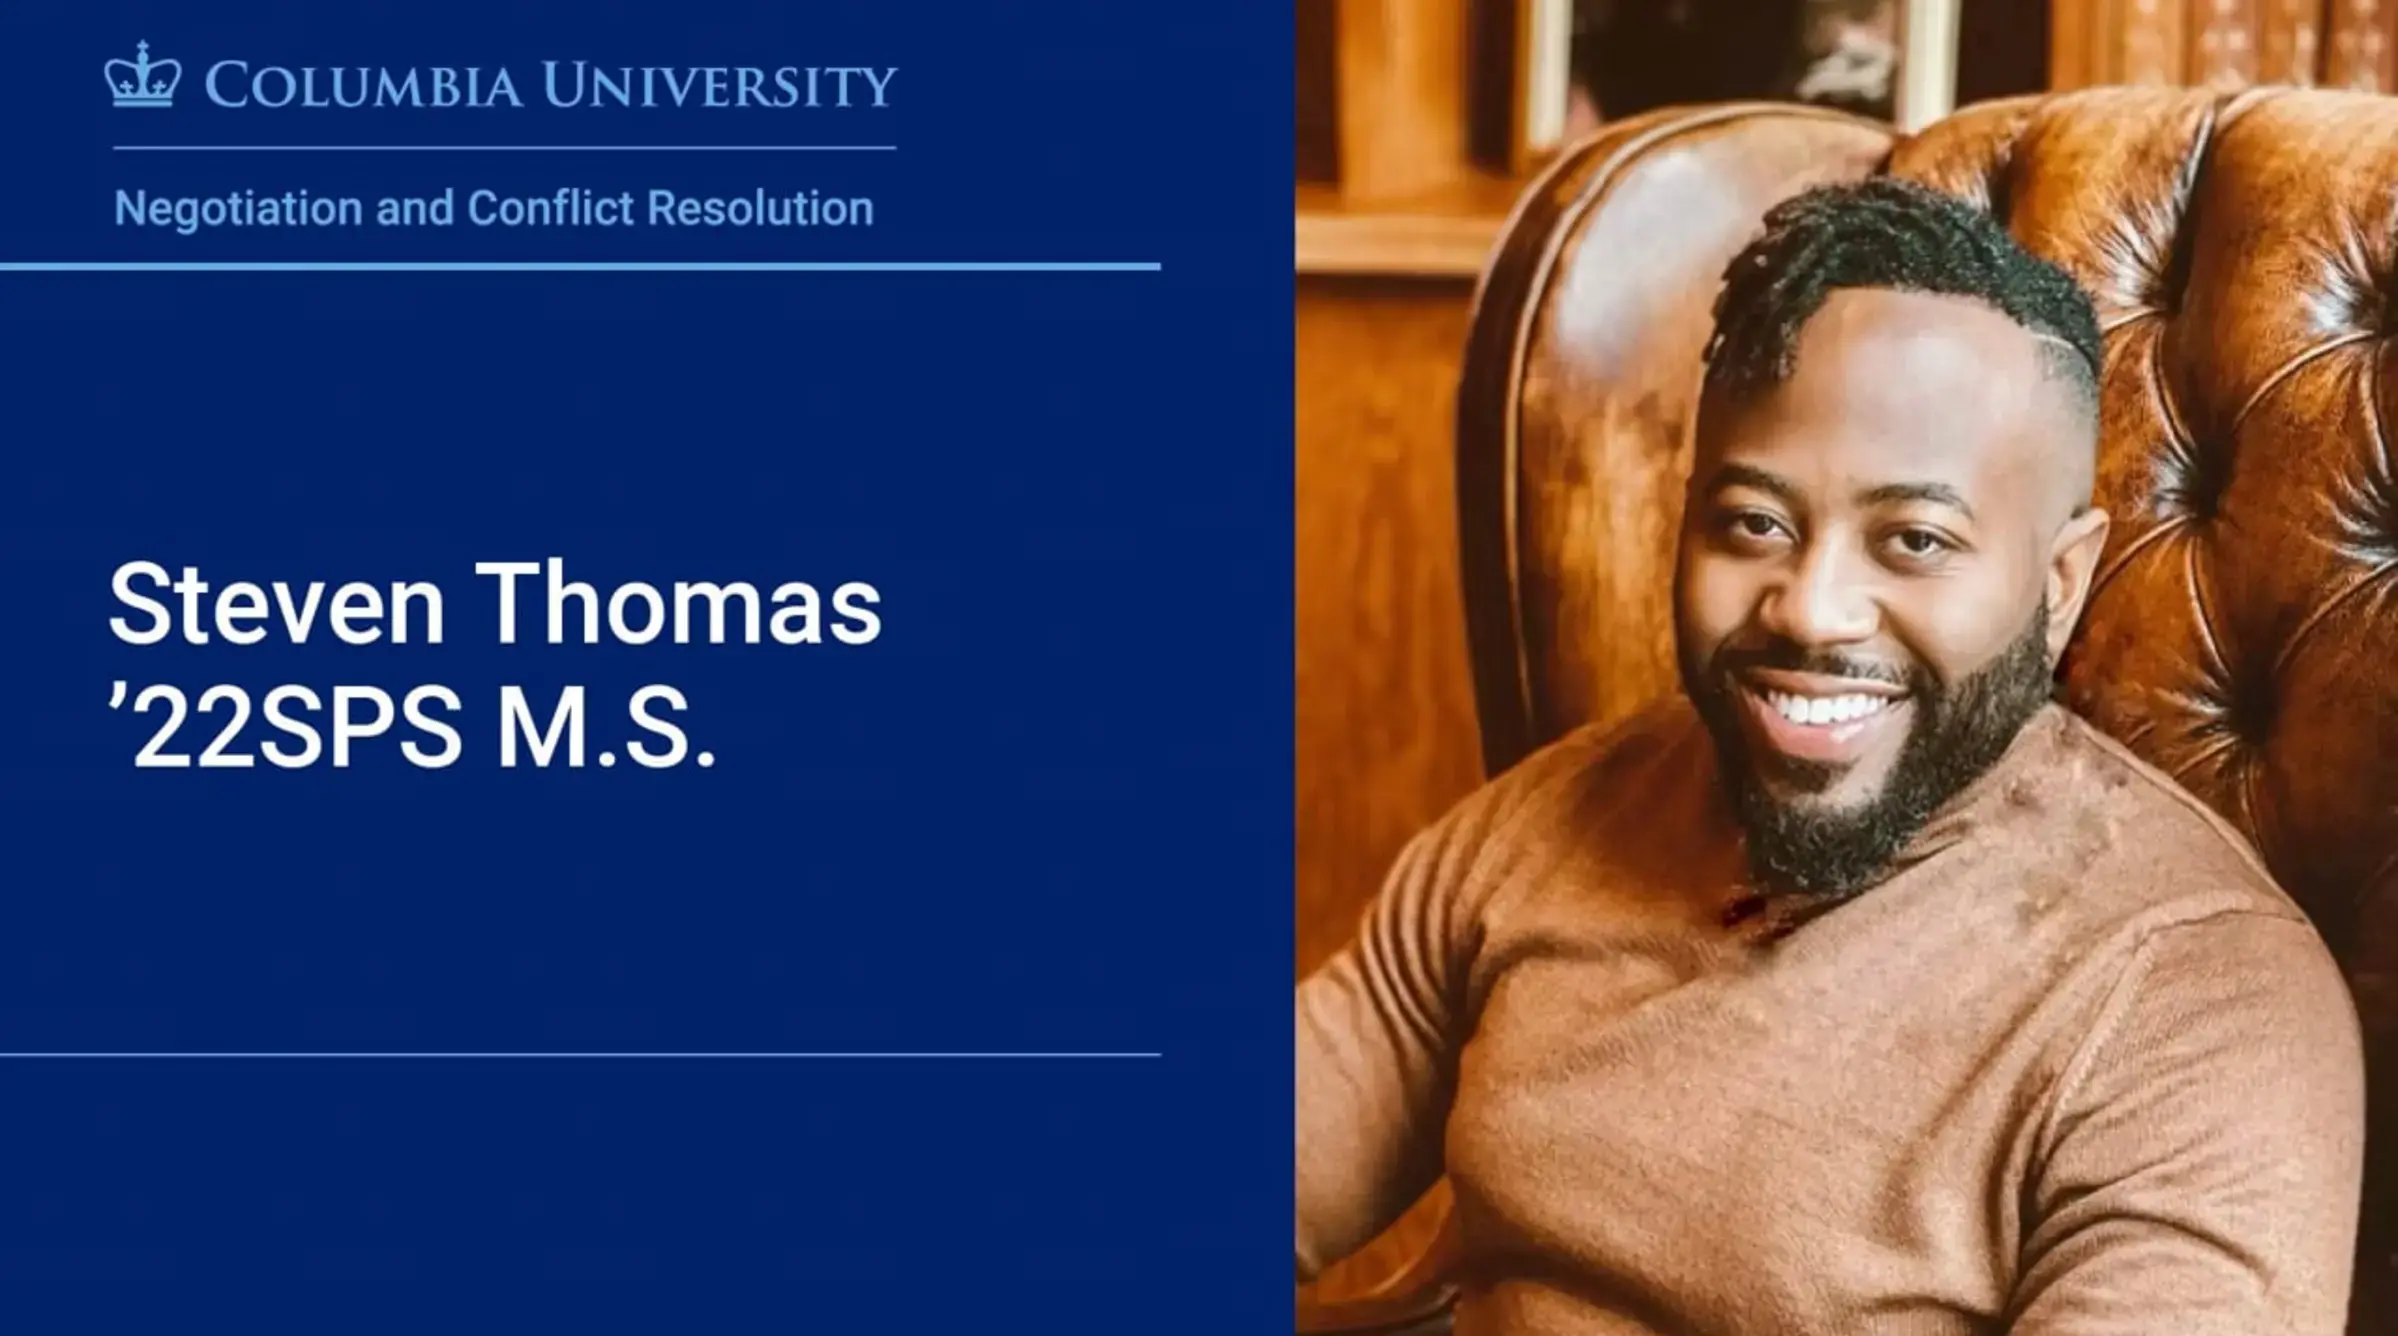 Steven Thomas, ’22SPS M.S. in Negotiation and Conflict Resolution